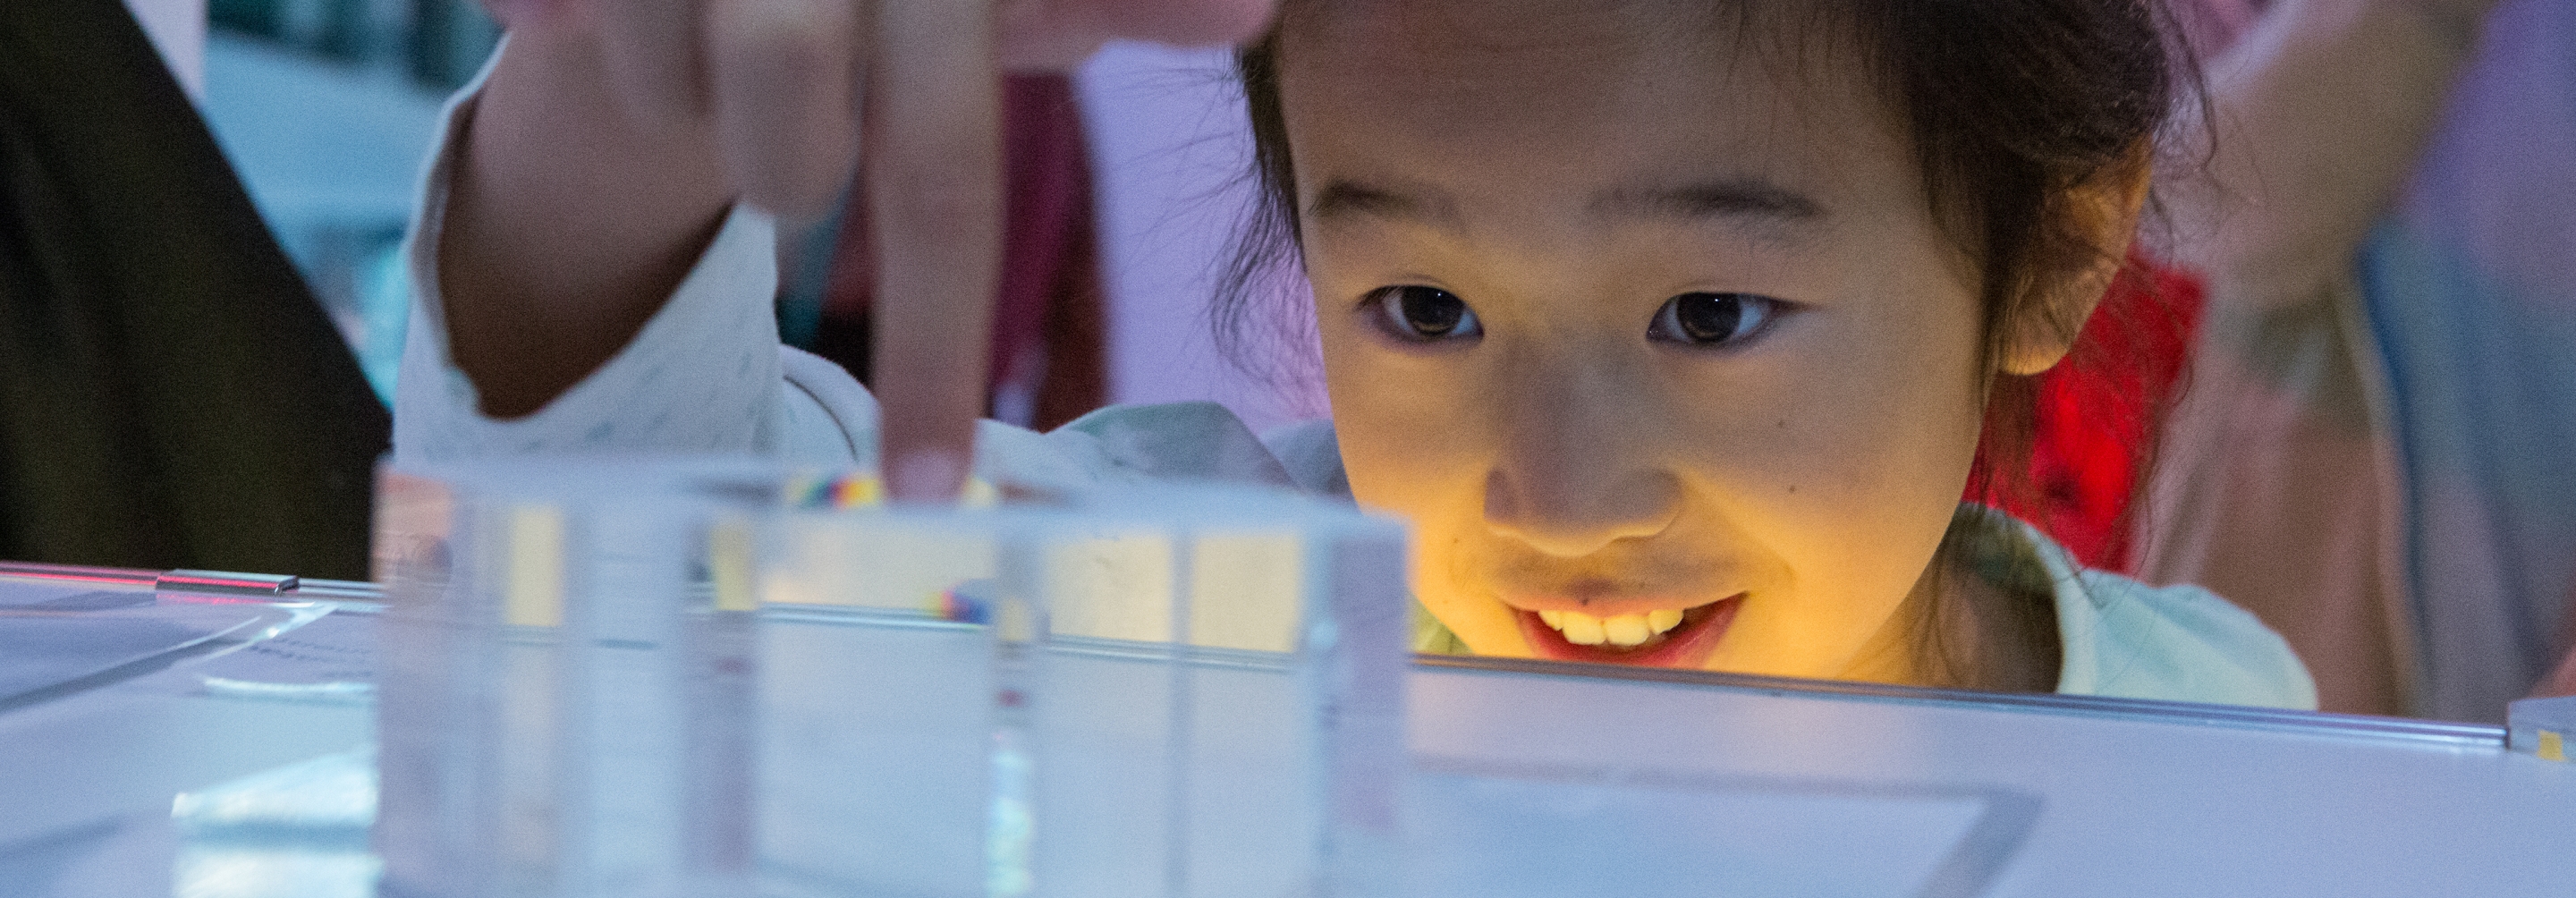 little girl making an experiment with wonder in her eyer at brainstem festival at Perimeter Institute